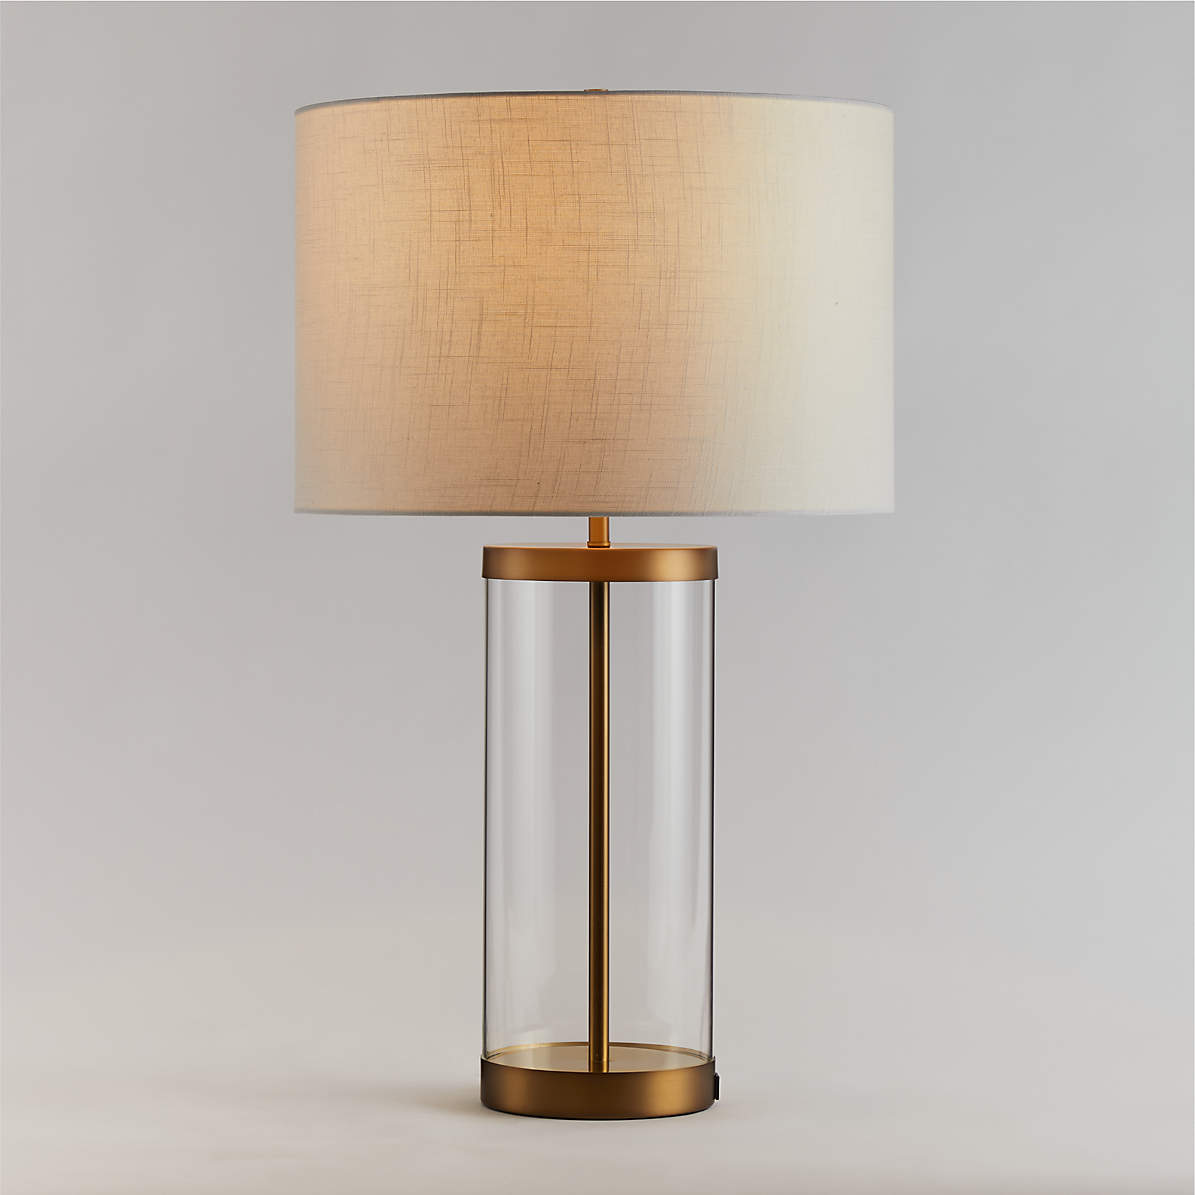 Promenade Avenue Black and Brass Floor Lamp with White Shade +